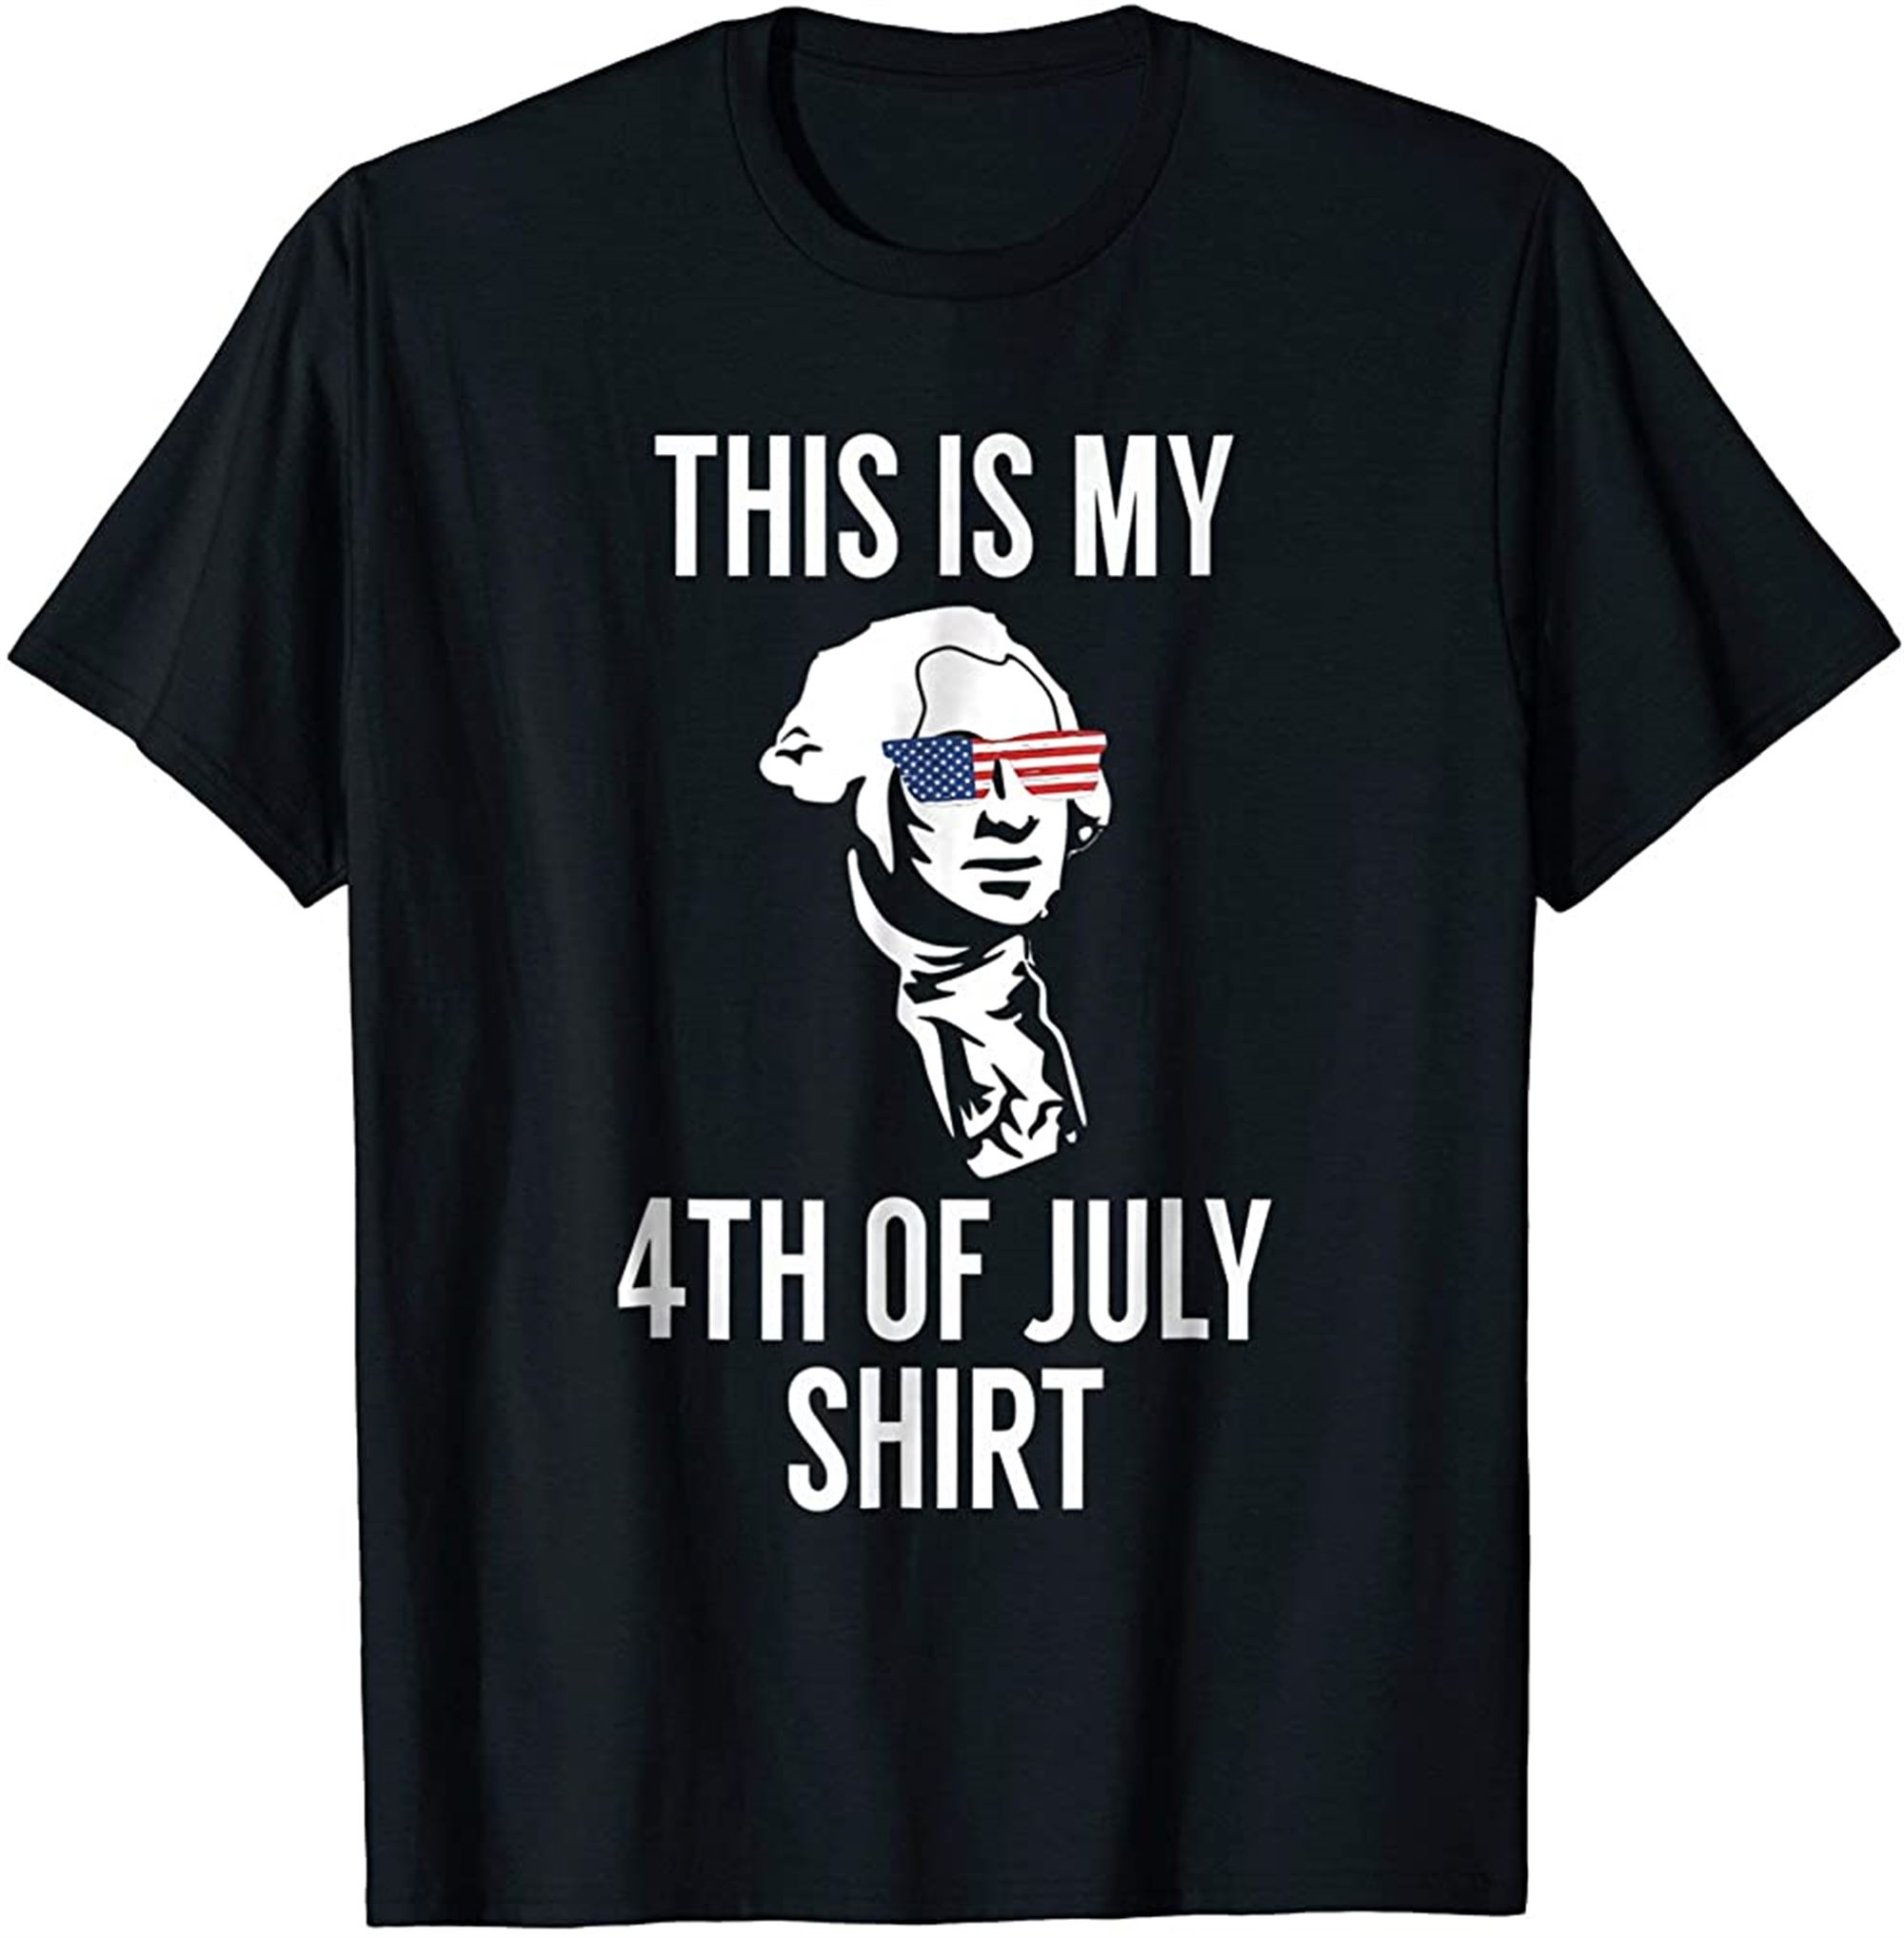 This Is My 4th Of July Shirt Funny American T-shirt Plus Size Up To 5xl